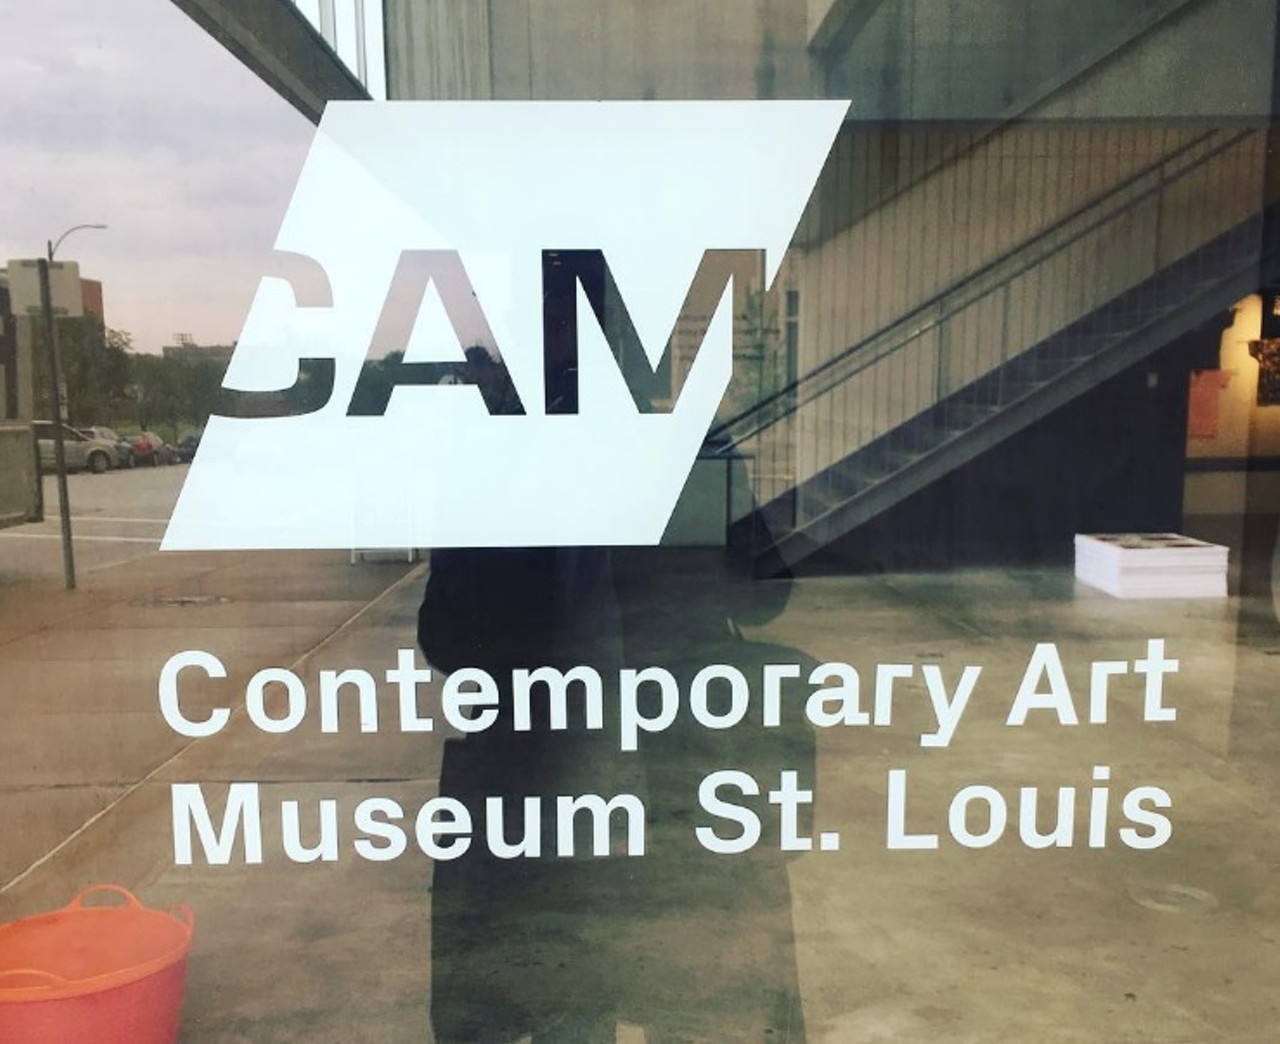 Contemporary Art Museum
3750 Washington Blvd.
St. Louis, MO 63108
(314) 535-4660
While you're on an art kick, be sure to visit the Contemporary Art Museum, where you'll see some of the great art being made today. Check back every time you visit, because the exhibitions are always changing. Photo courtesy of Instagram / pradikat.